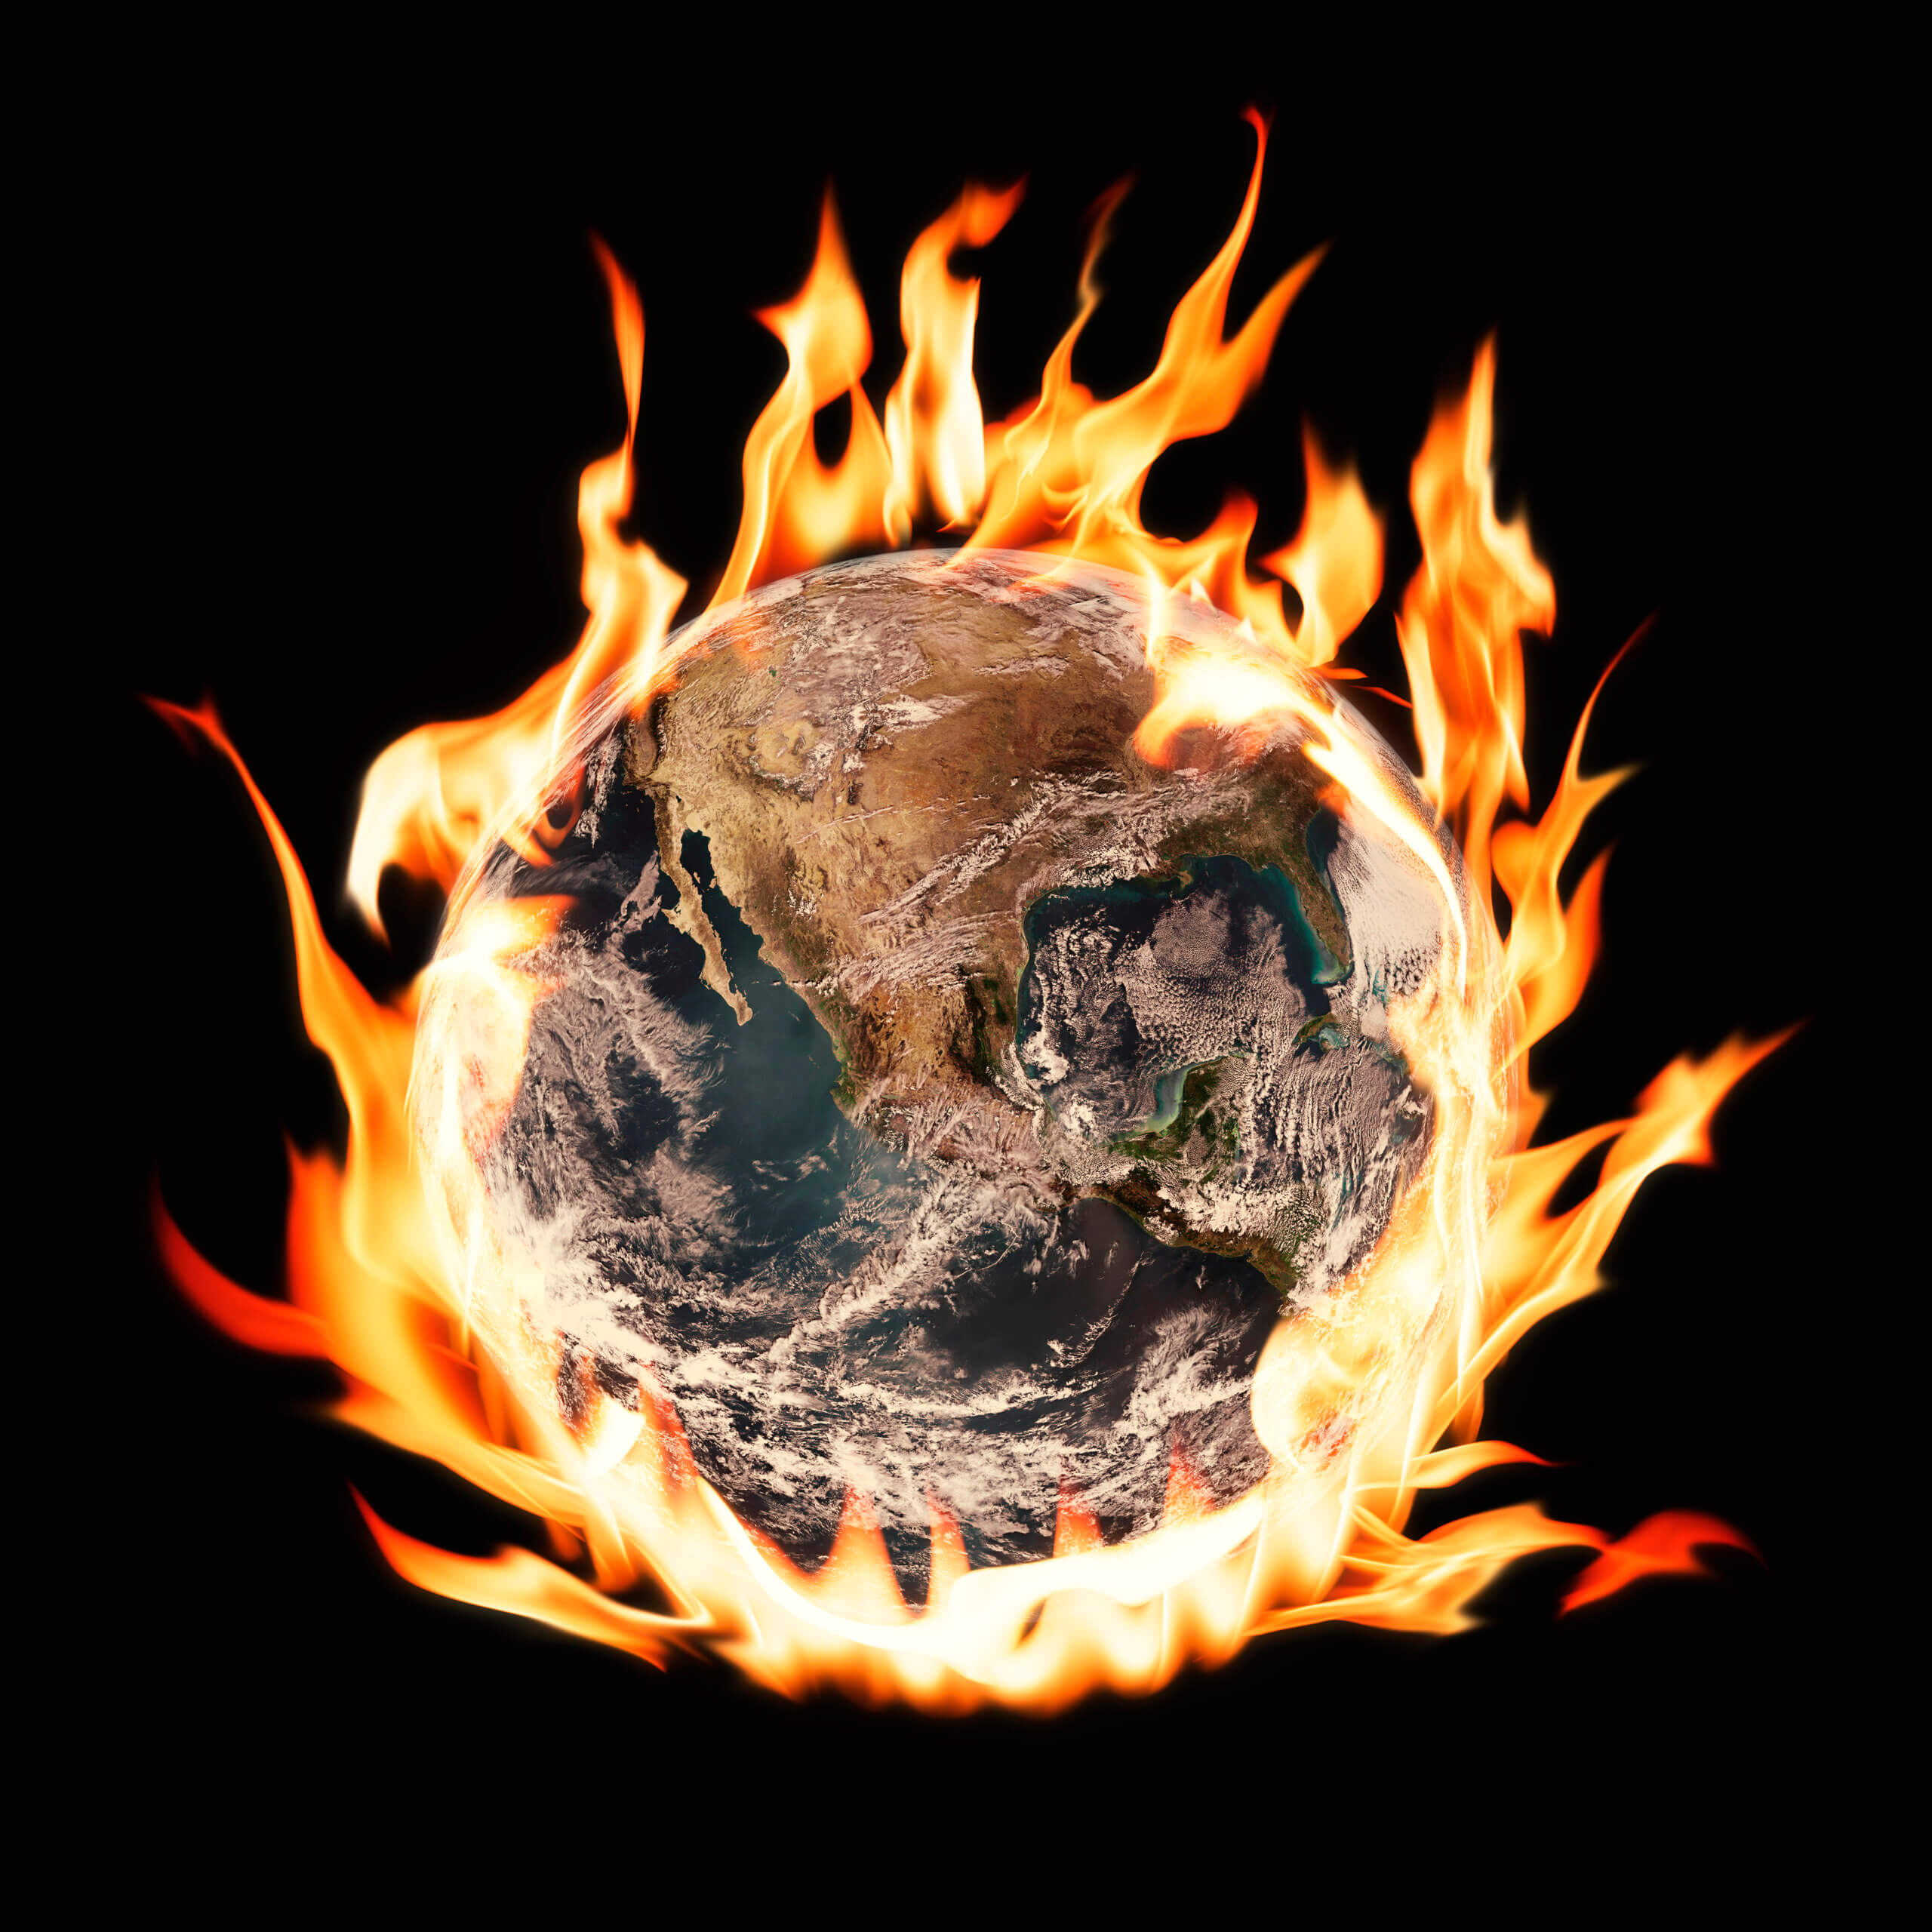 world-fire-image-global-warming-environment-remix-with-fire-effect-scaled.jpg